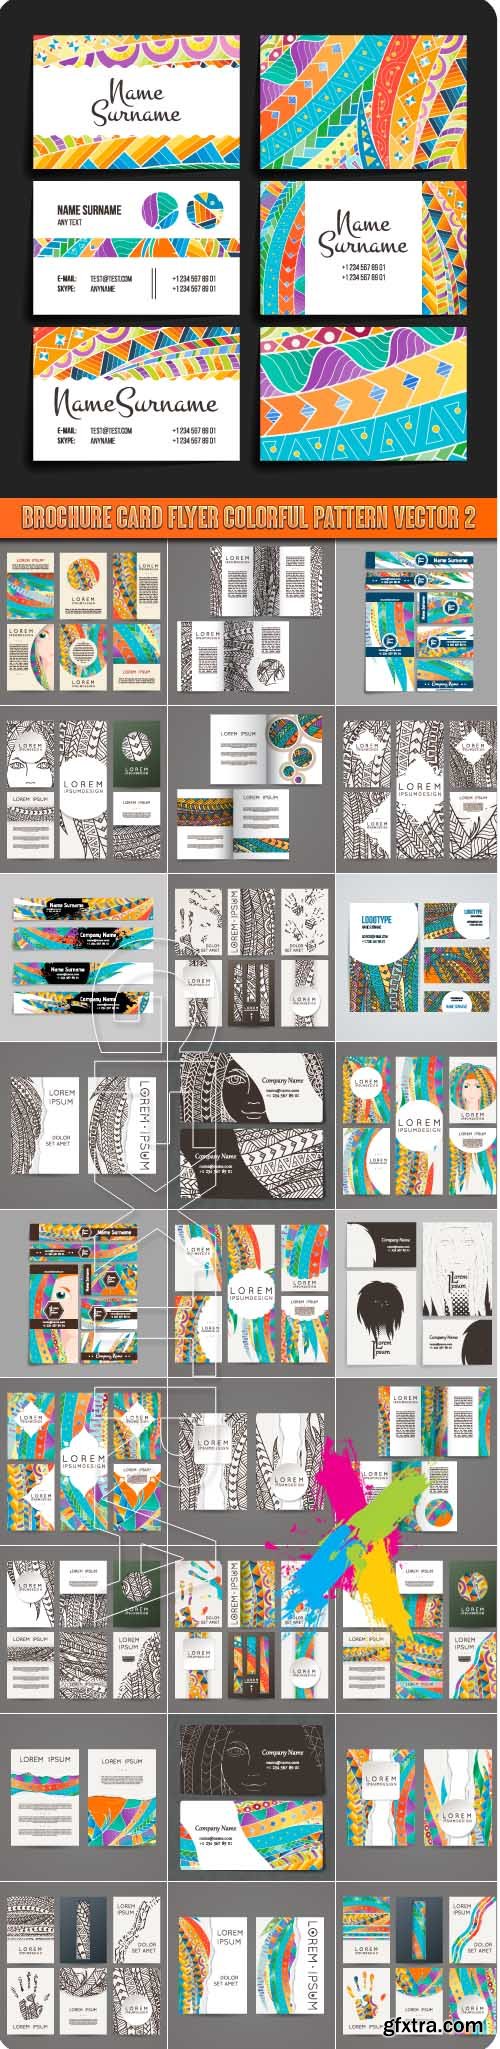 Brochure card flyer colorful pattern vector 2